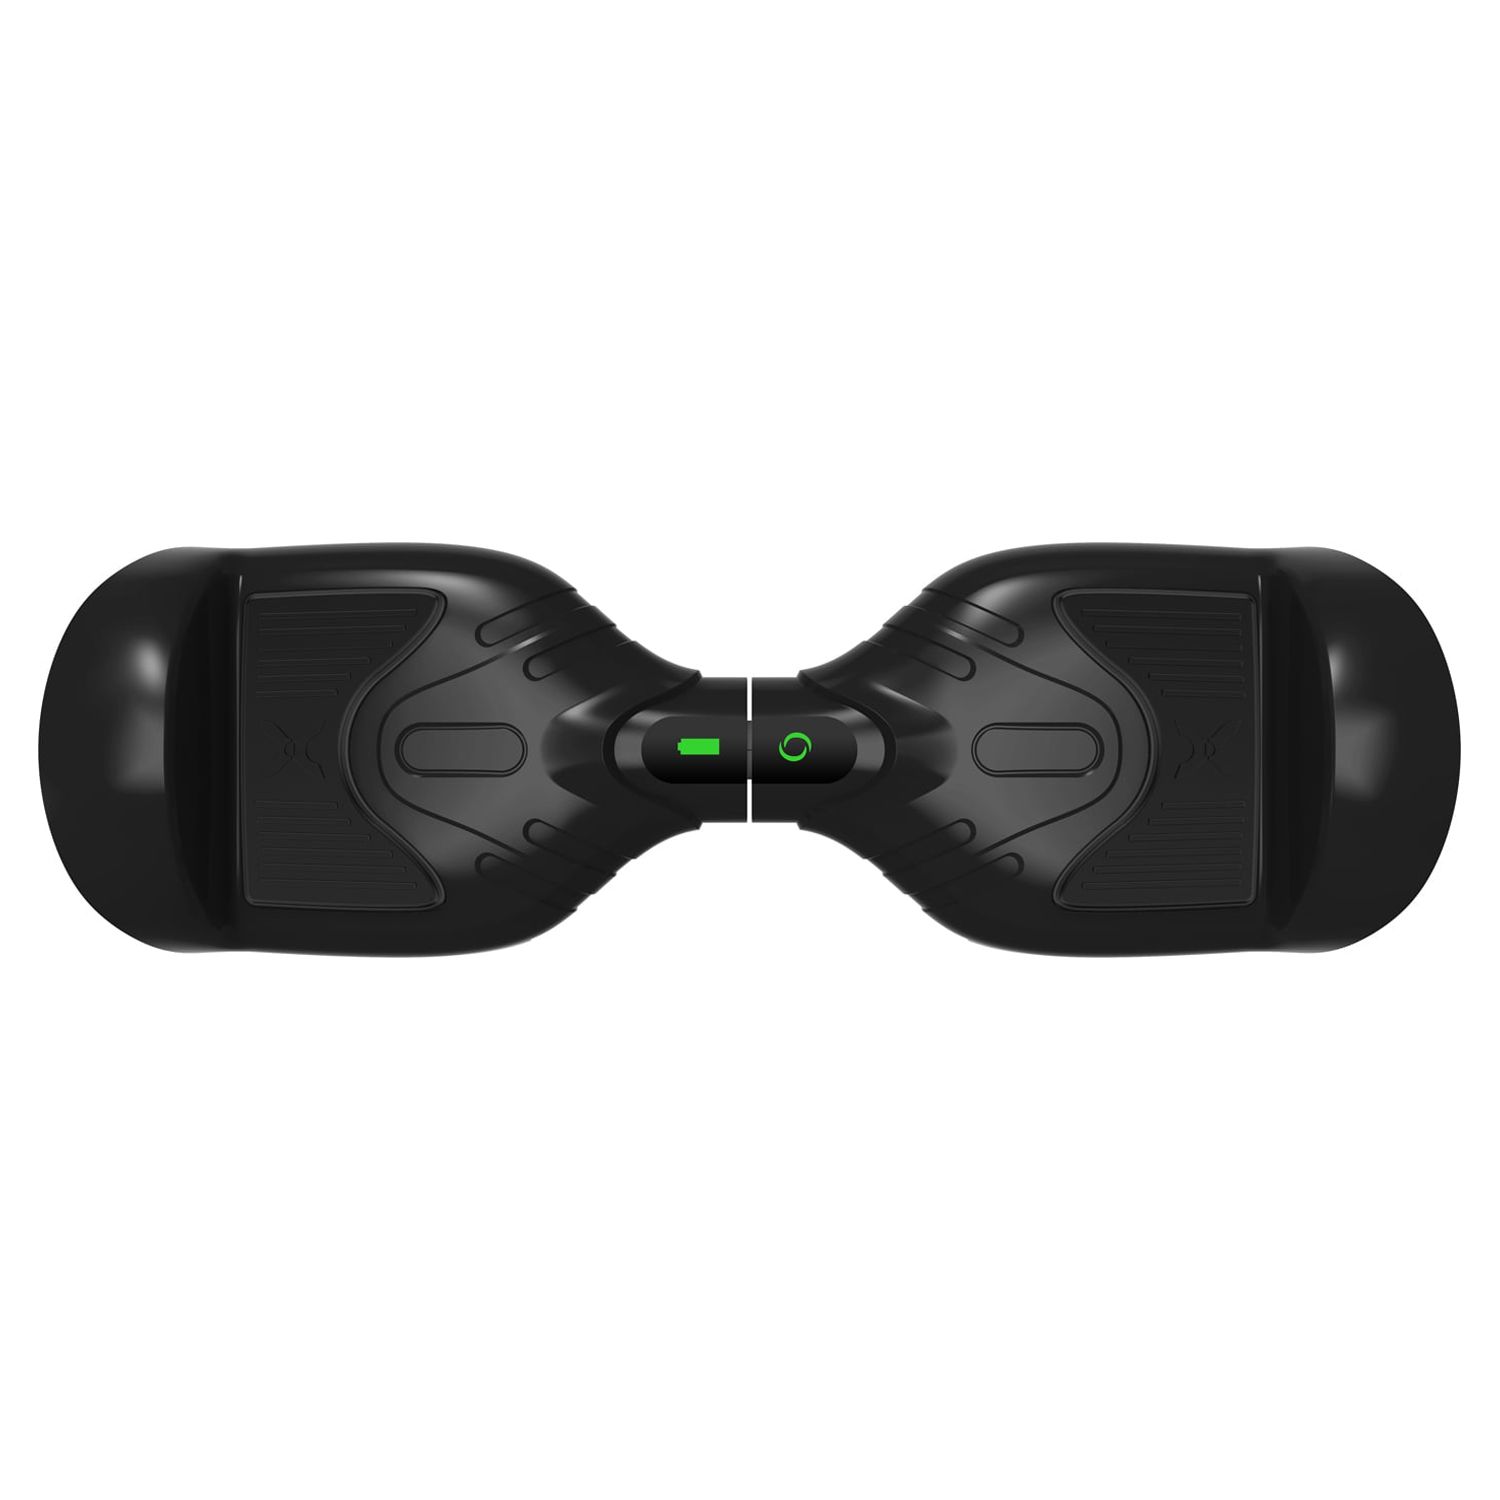 Hover-1 Blast Hoverboard, LED Lights, 160 lbs Max Weight, 7 mph Max Speed, Black - image 3 of 5